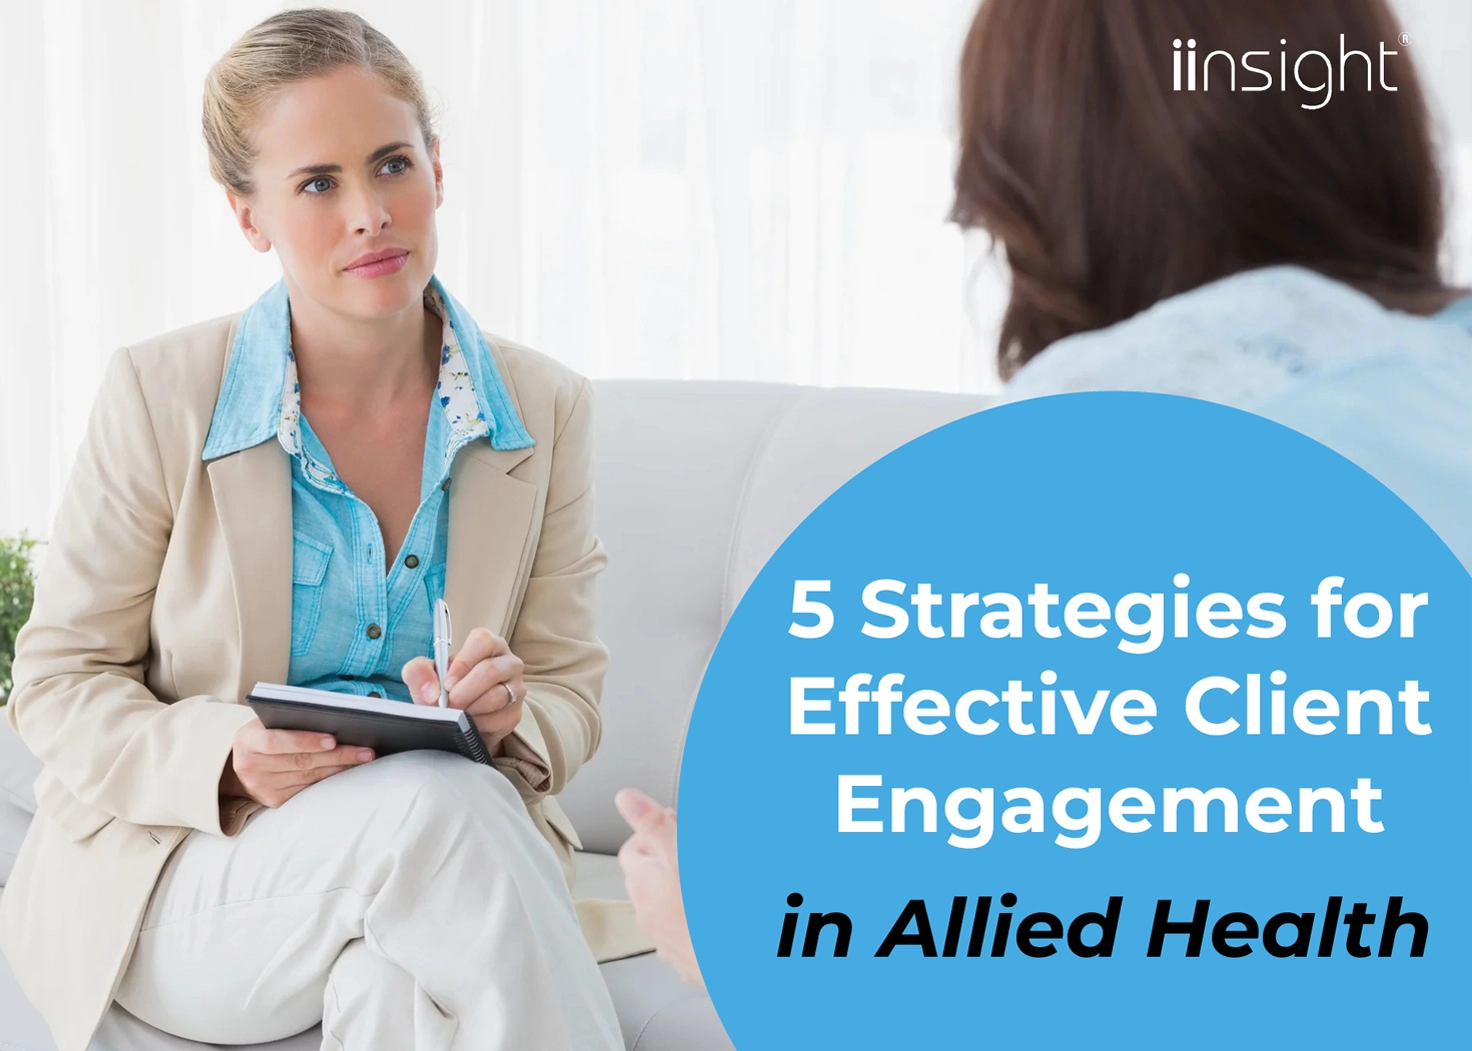 5 Strategies for Effective Client Engagement in Allied Health